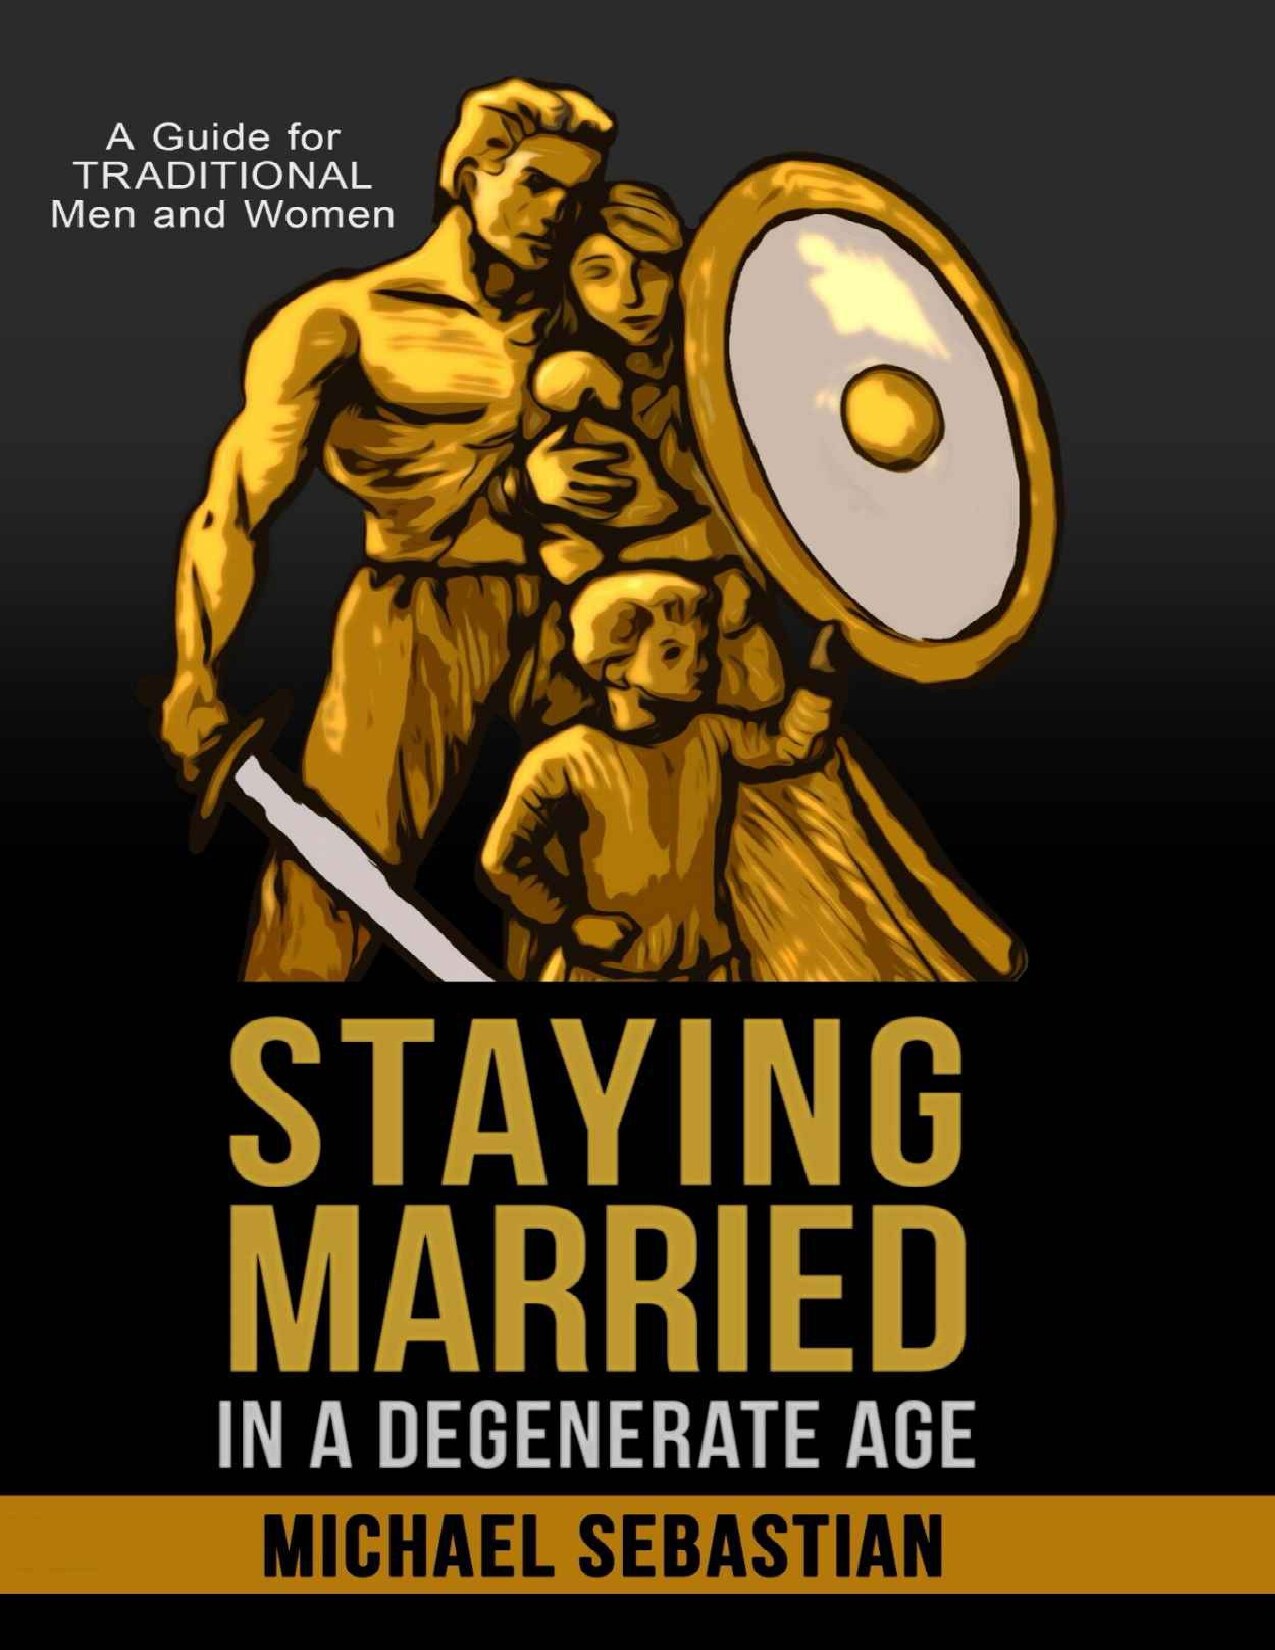 Staying Married in a Degenerate Age: A Guide for Traditional Men and Women